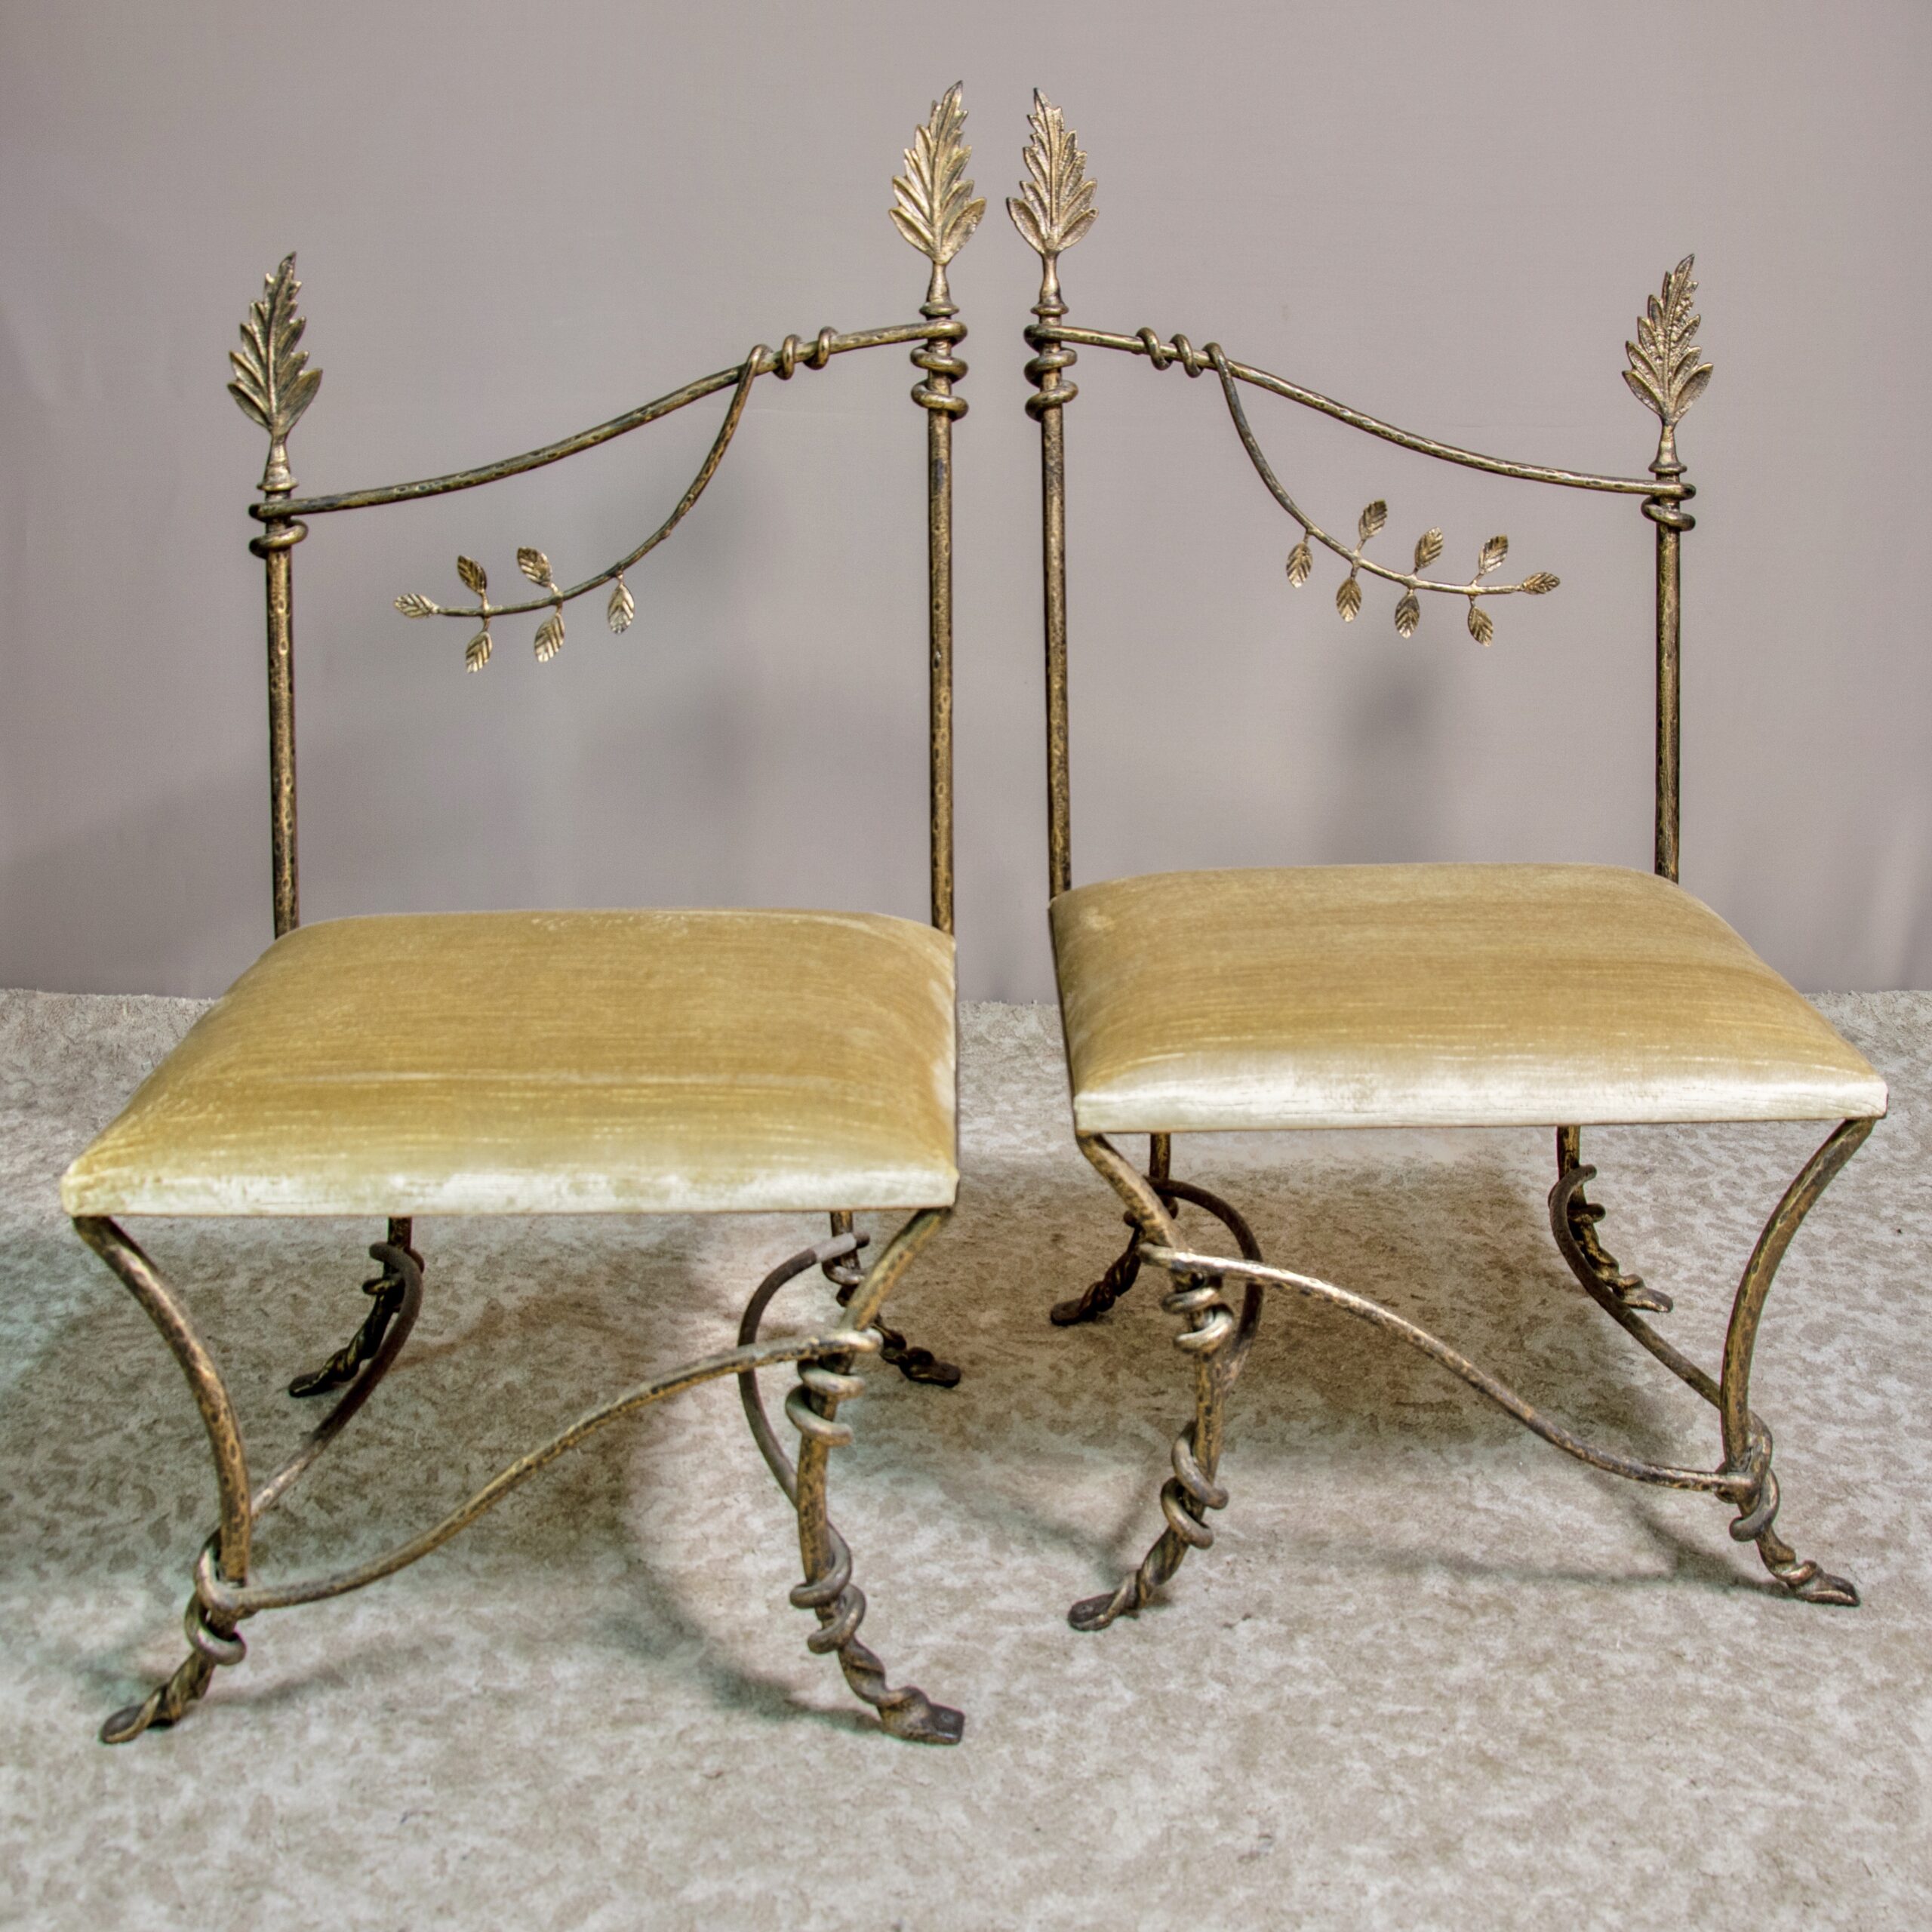 Pair of Modern Metal Armchairs Signed by Emilio Robba